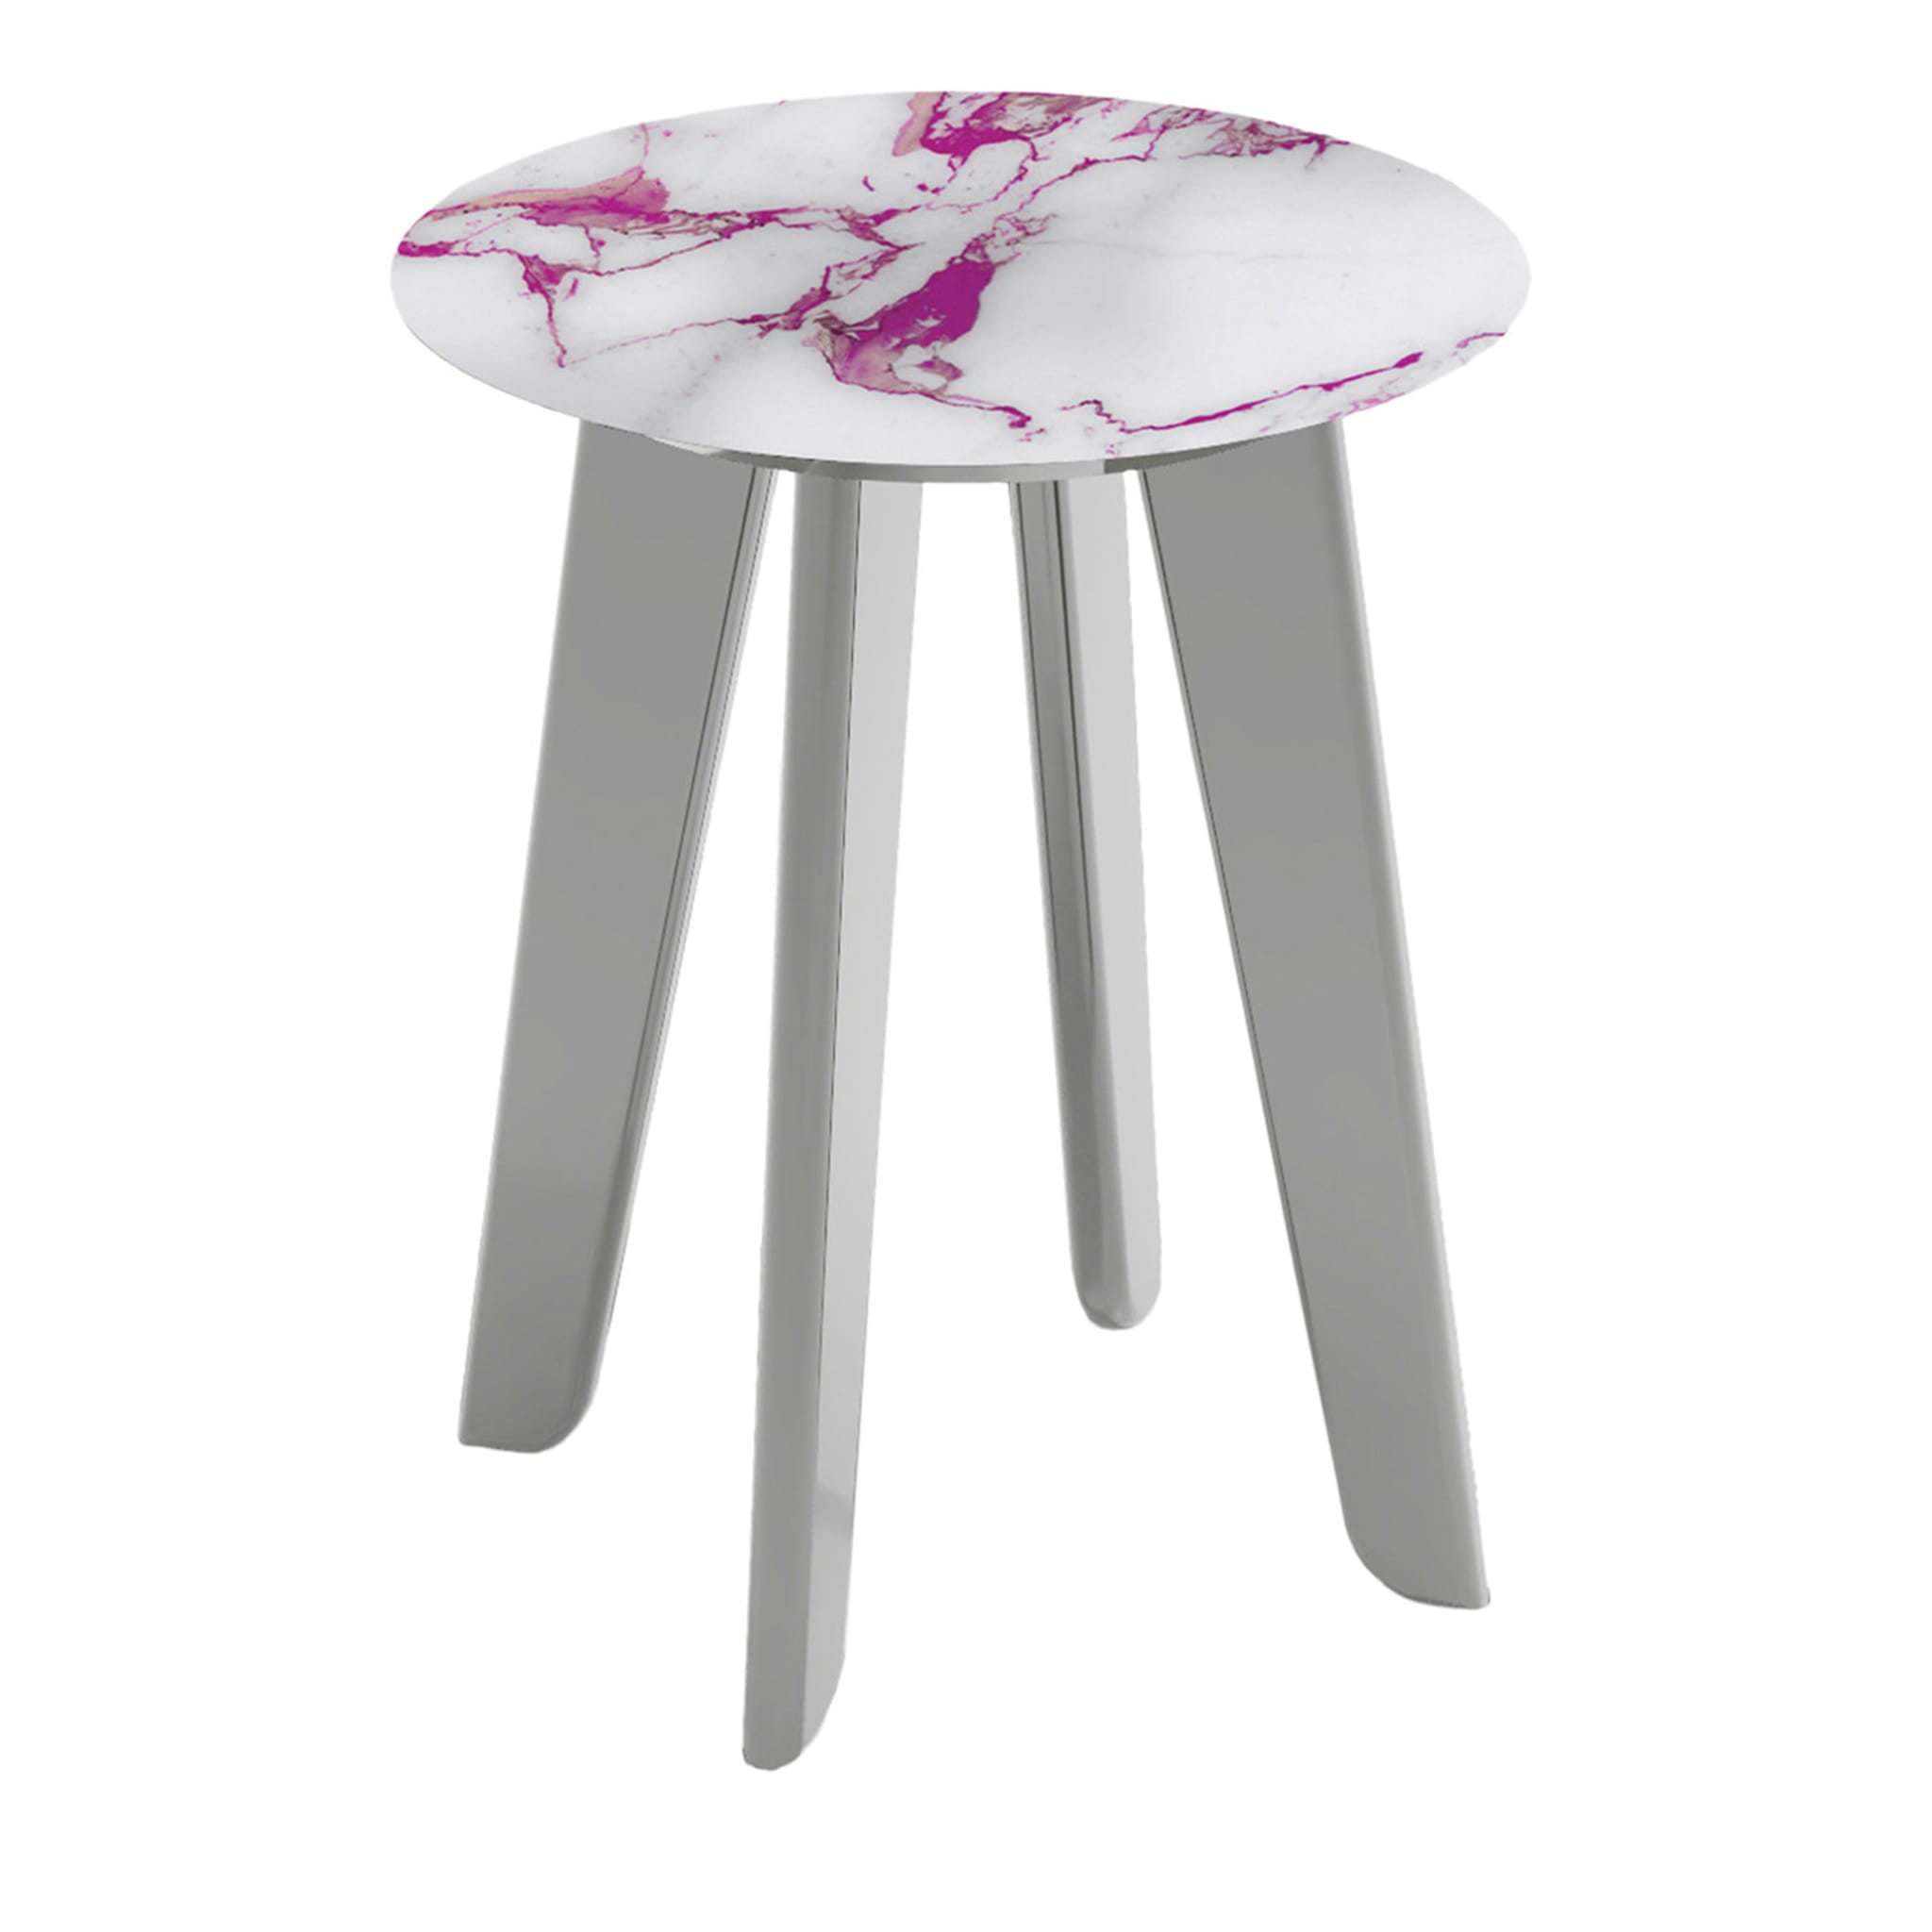 Owen Tall Round Side Table with White and Pink Top (Table d'appoint ronde haute avec plateau blanc et rose) - Vue principale